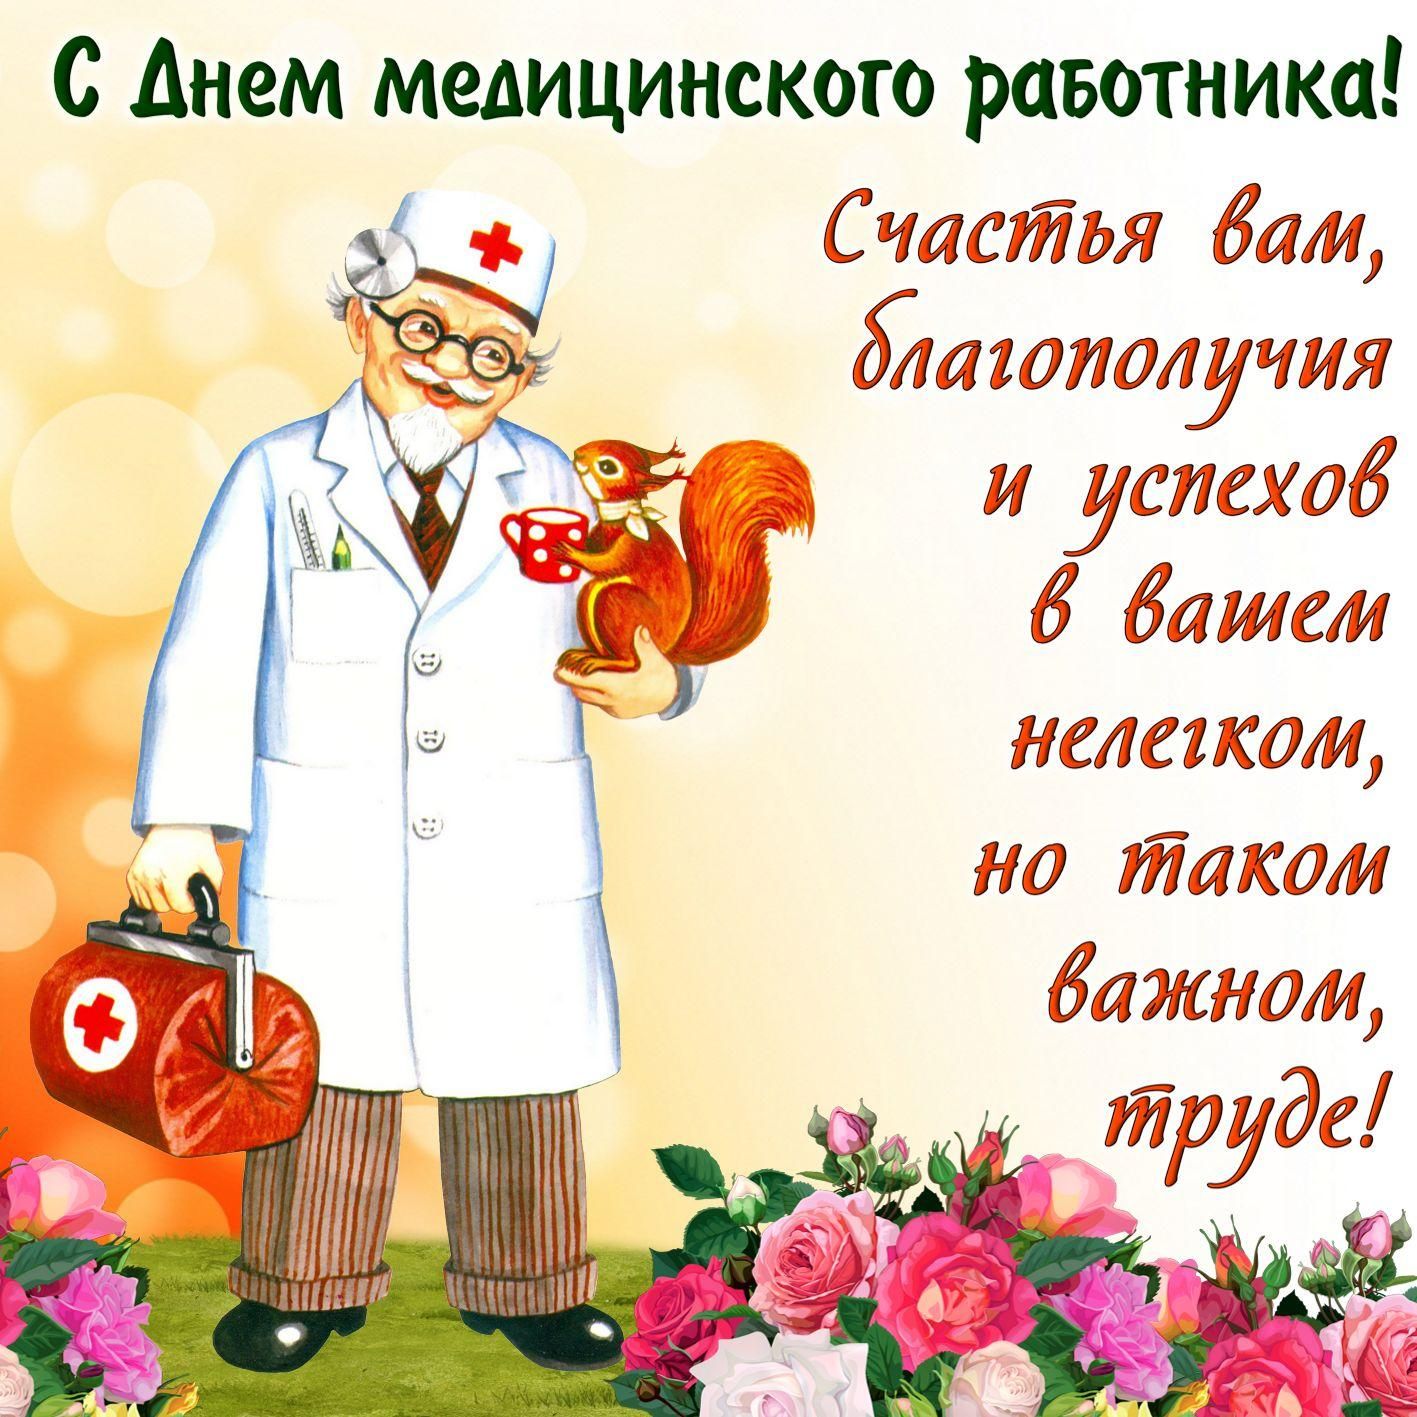 Photo International Doctor's Day October 3, 2022: cool postcards and congratulations in verse to doctors 17